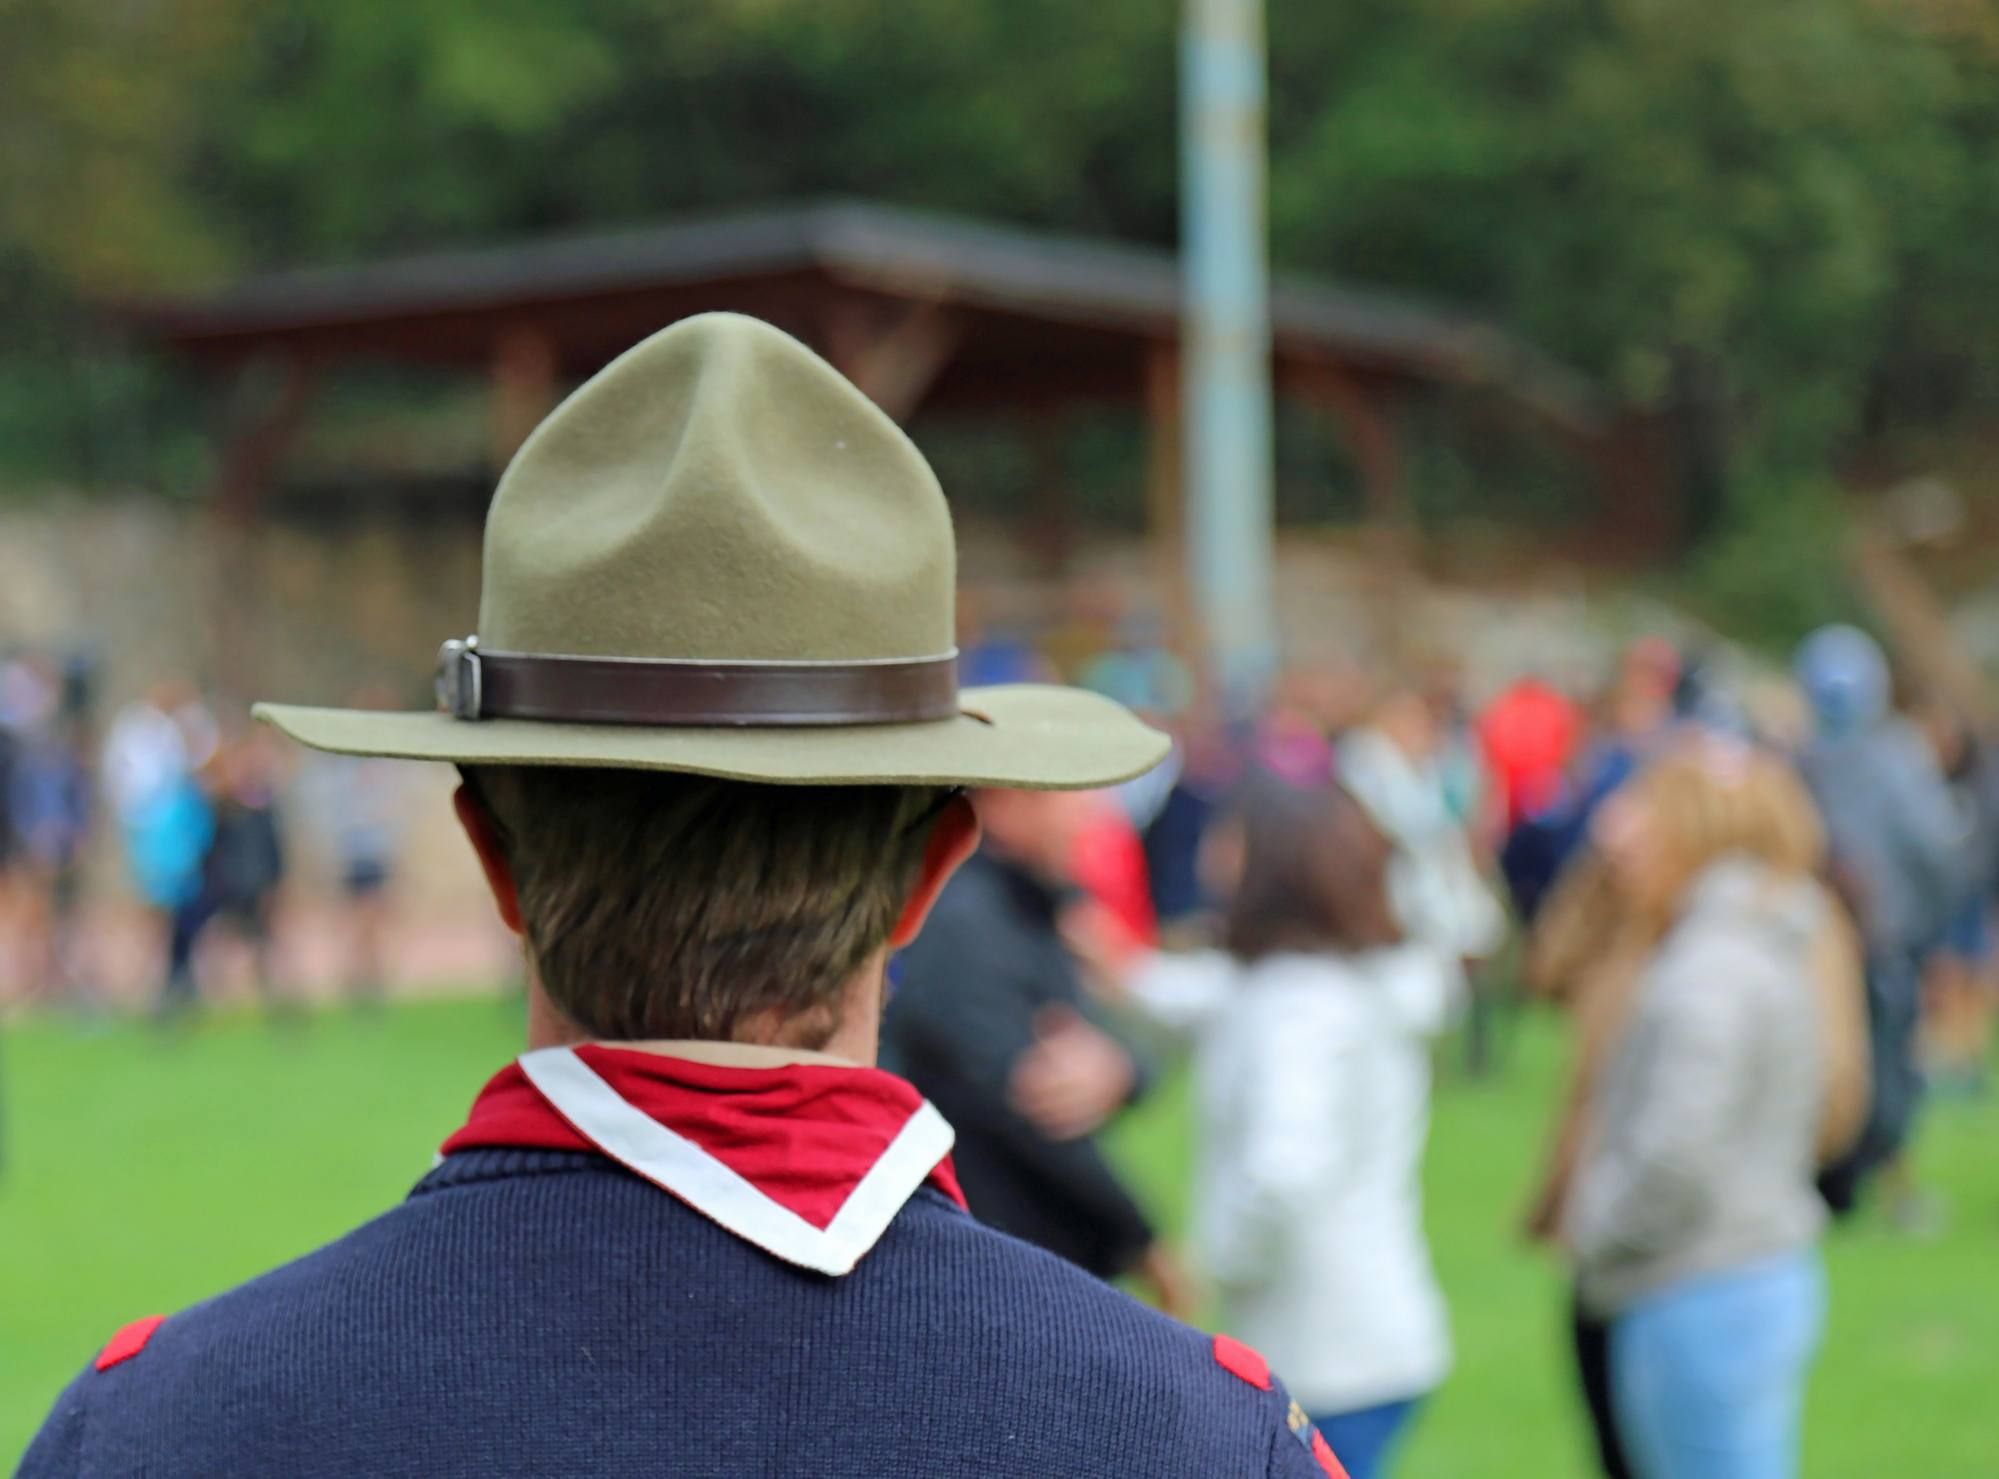 LDS may have played a role in Boy Scouts sexual abuse.